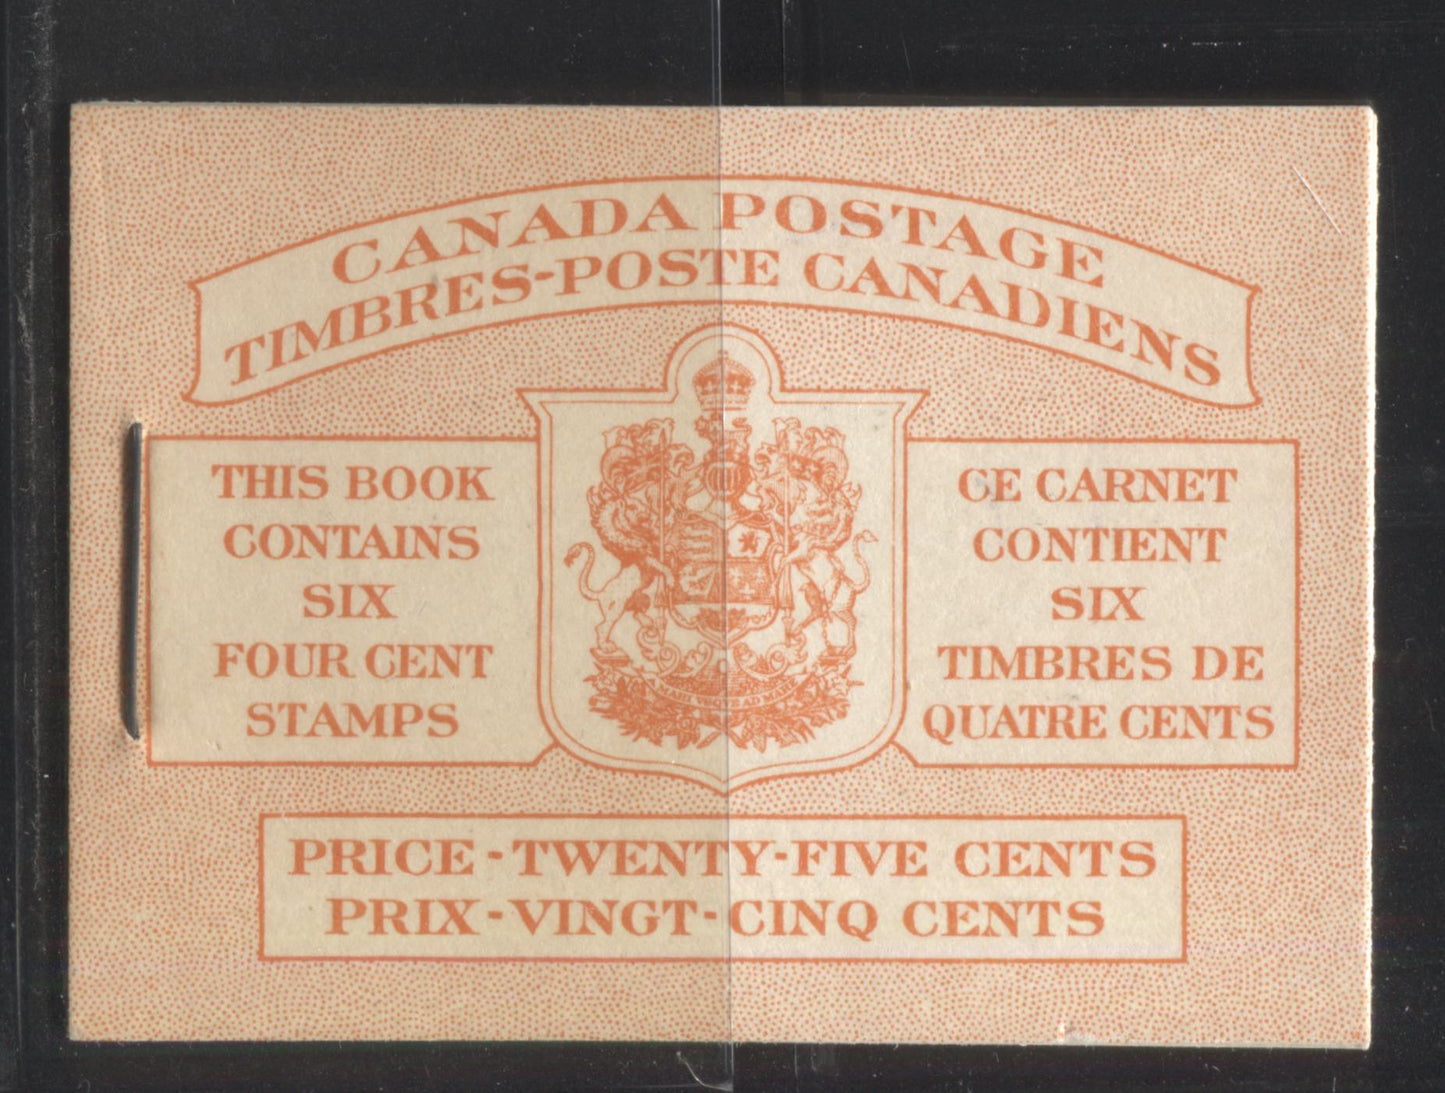 Lot 252 Canada #BK36g 1942-1949 War Issue, Complete 25¢ Bilingual Booklet,  Rate Page With 7¢ and 6¢ Rates, 17 mm Staple, Horizontal Ribbed Paper,  Type 2 Covers, Harris Front Cover IIIe, Back Cover Fb